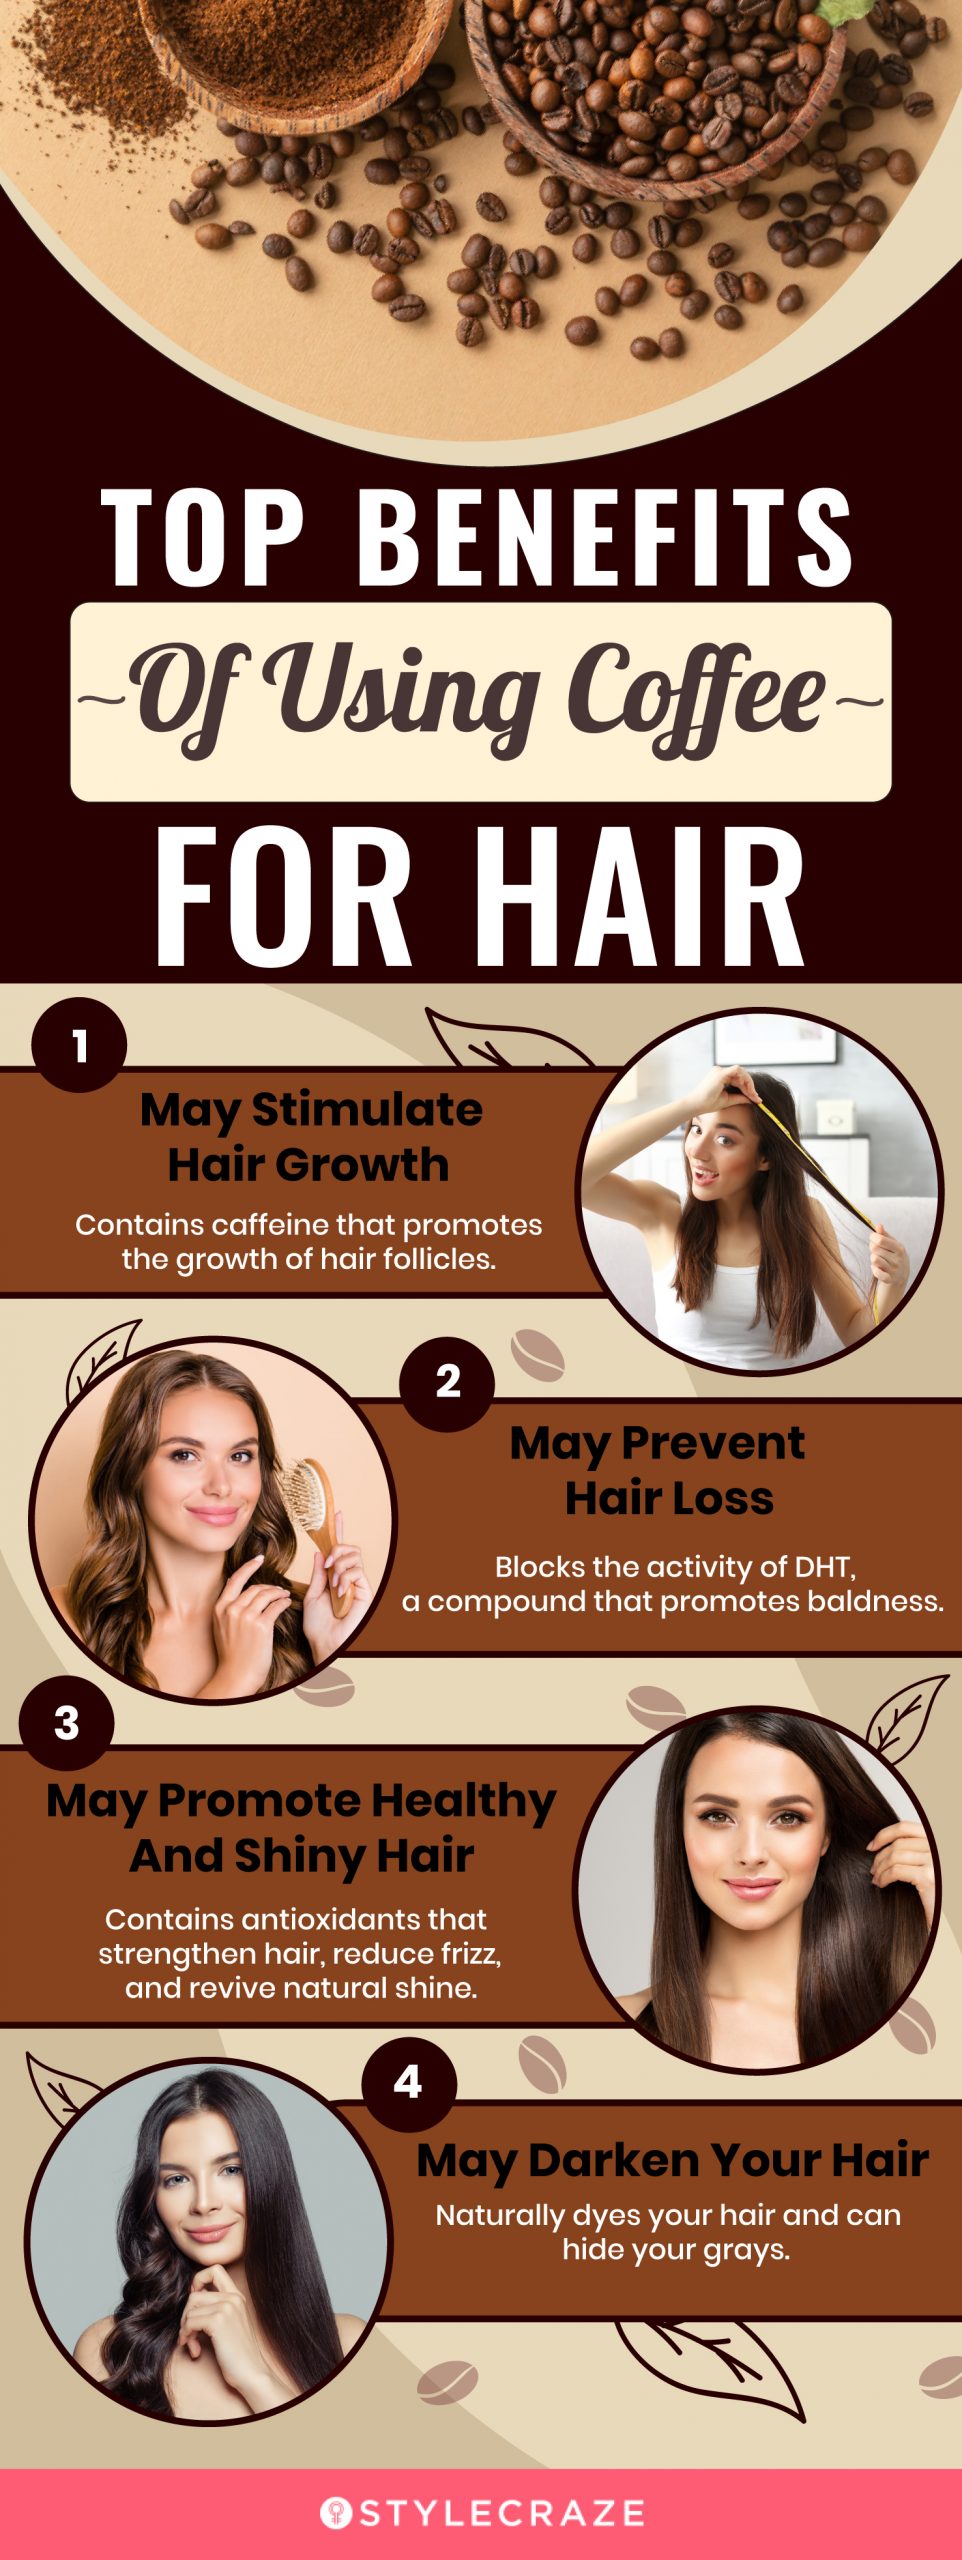 Coffee for Hair - Benefits, Uses & Side Effects of Coffee for Hair